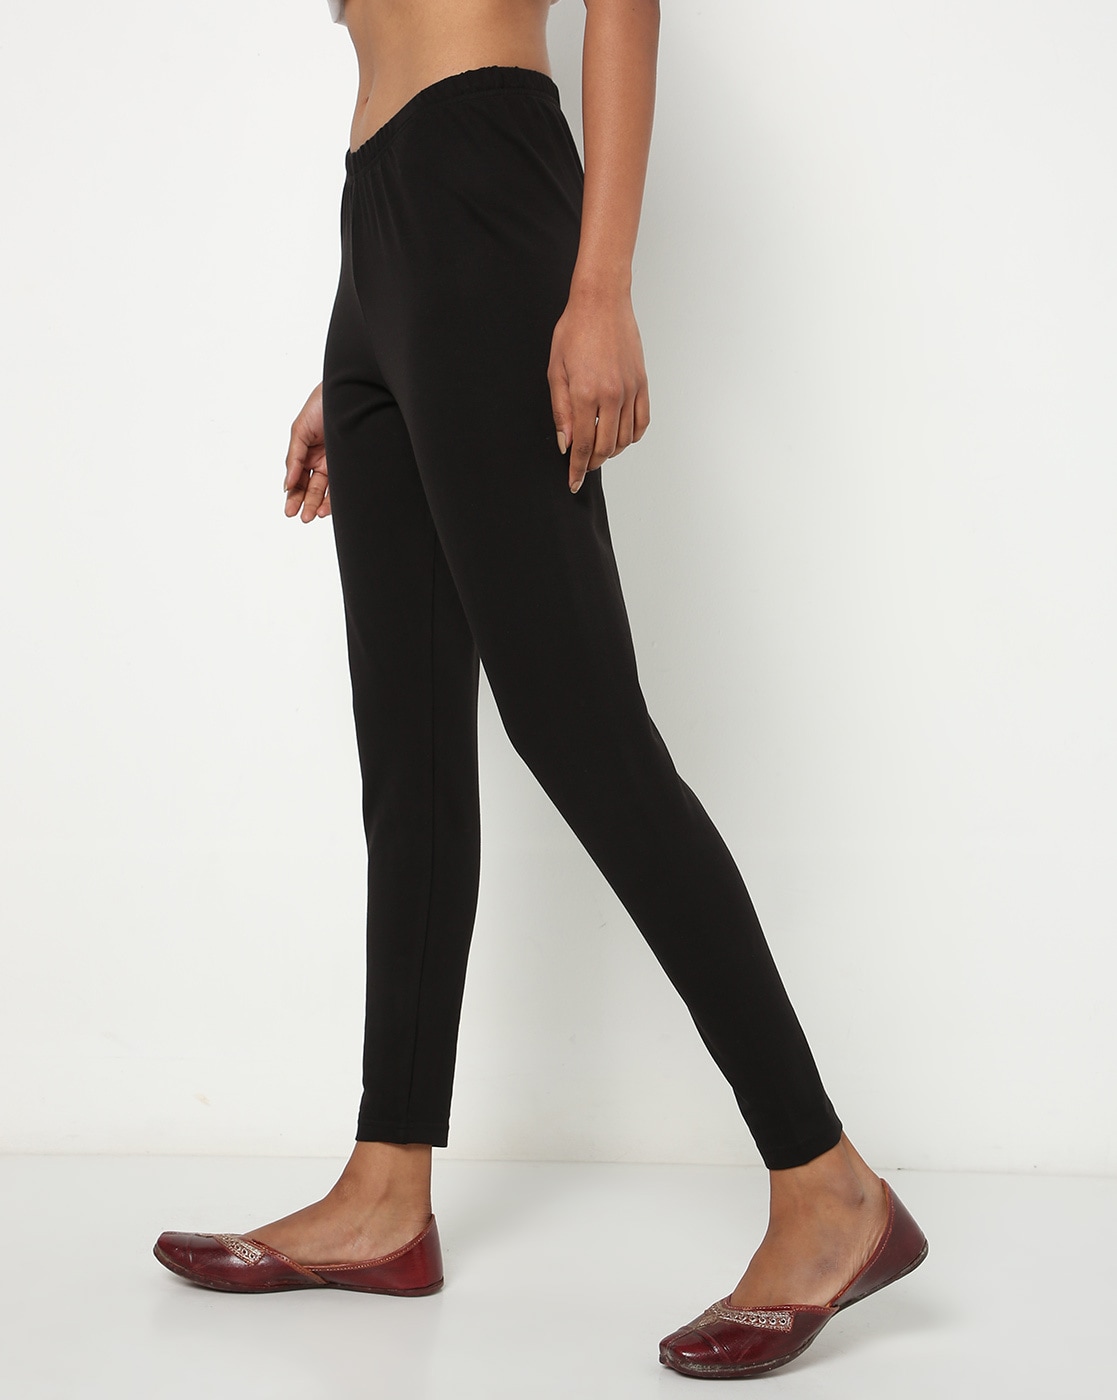 Buy Avaasa Mix N' Match Leggings with Elasticated Waist at Redfynd